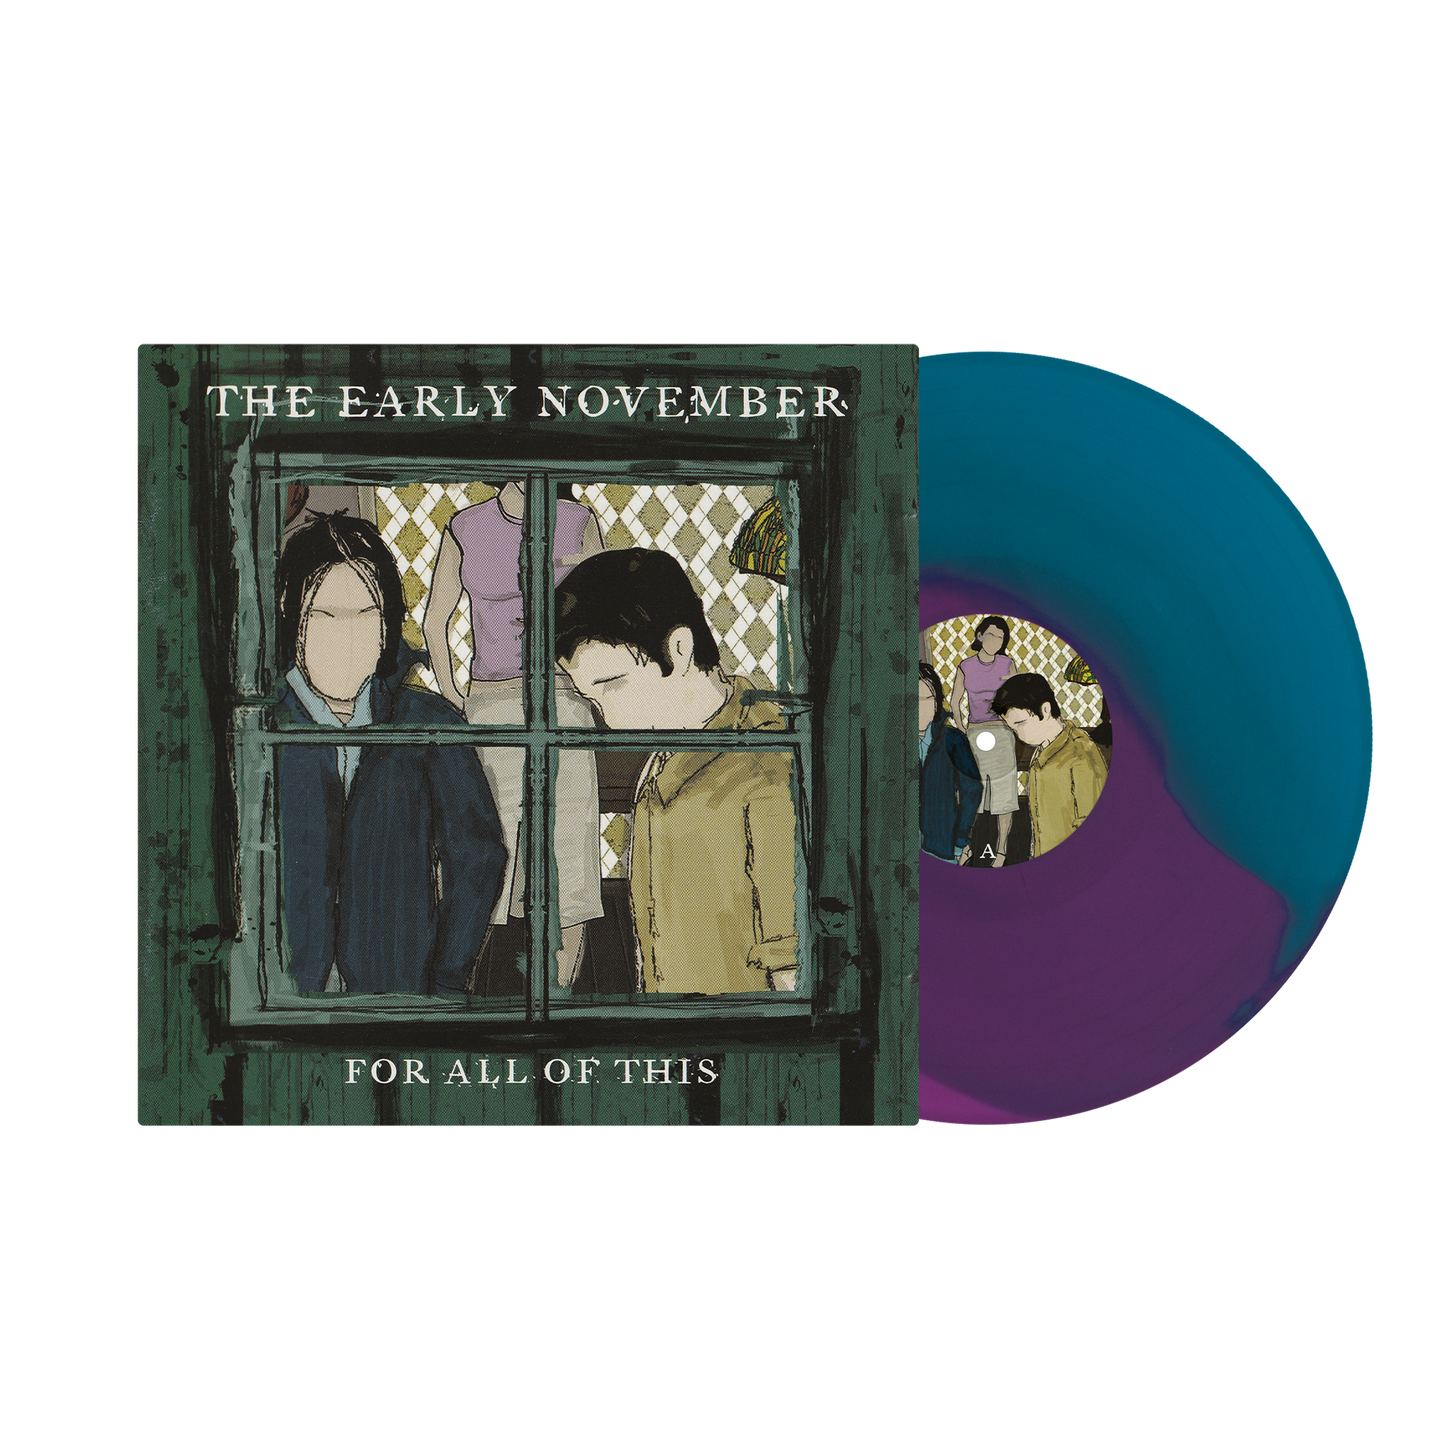 The Early November - “For All Of This” Vinyl